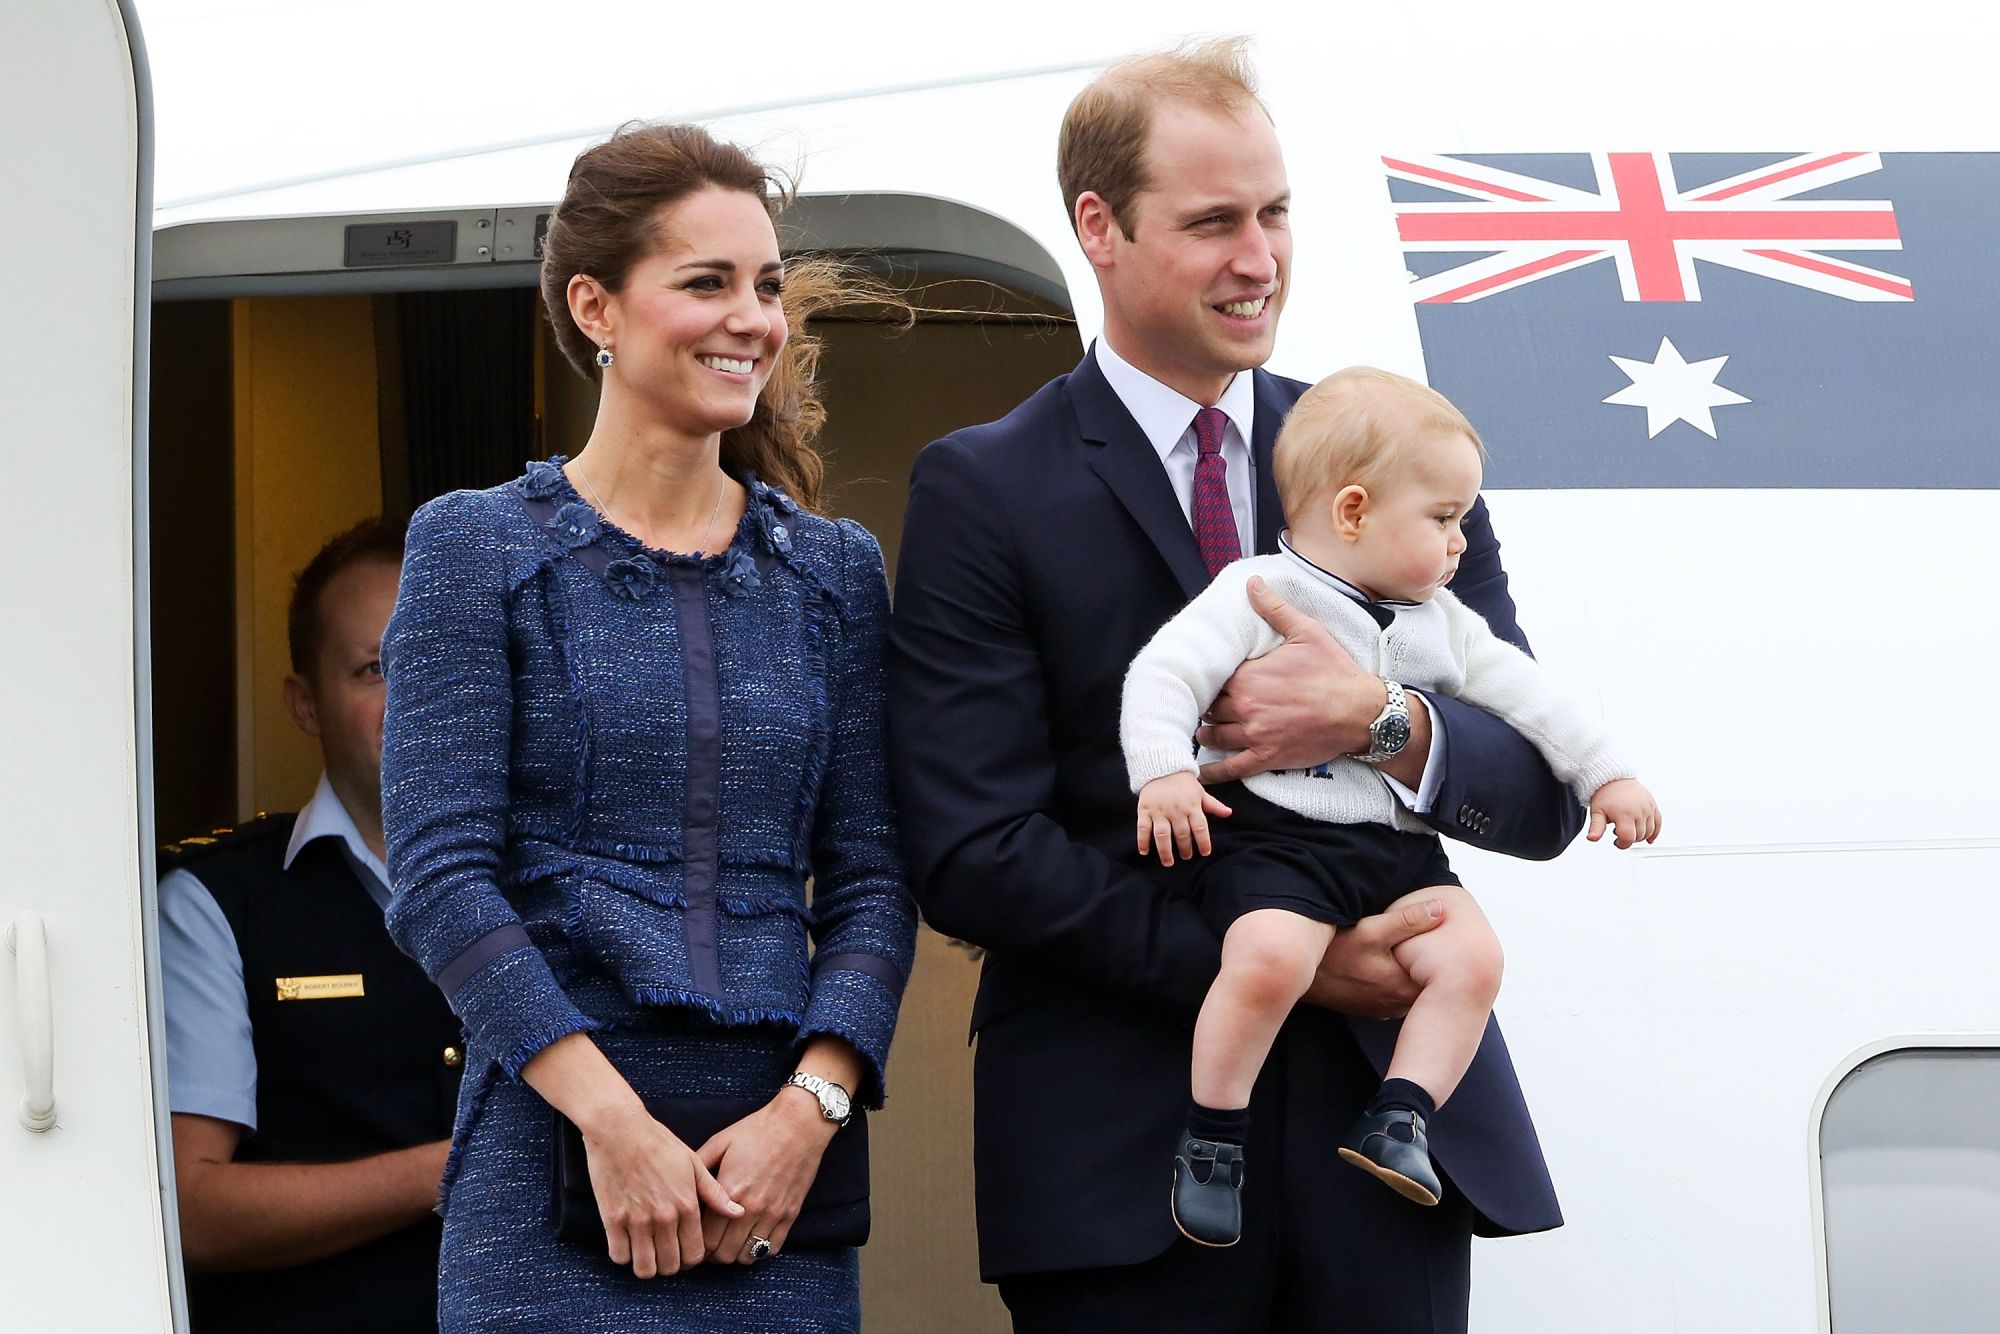 WELLINGTON, NEW ZEALAND - APRIL 16:  Catherine, Duchess of Cambridge, Prince William, Duke of Cambridge and Prince George of Cambridge look on before boarding a Royal Australian Air Force plane for their flight to Australia at Wellington Airport's military terminal April 16, 2014 in Wellington, New Zealand. The Duke and Duchess of Cambridge are on a three-week tour of Australia and New Zealand, the first official trip overseas with their son, Prince George of Cambridge.  (Photo by Hagen Hopkins/Getty Images